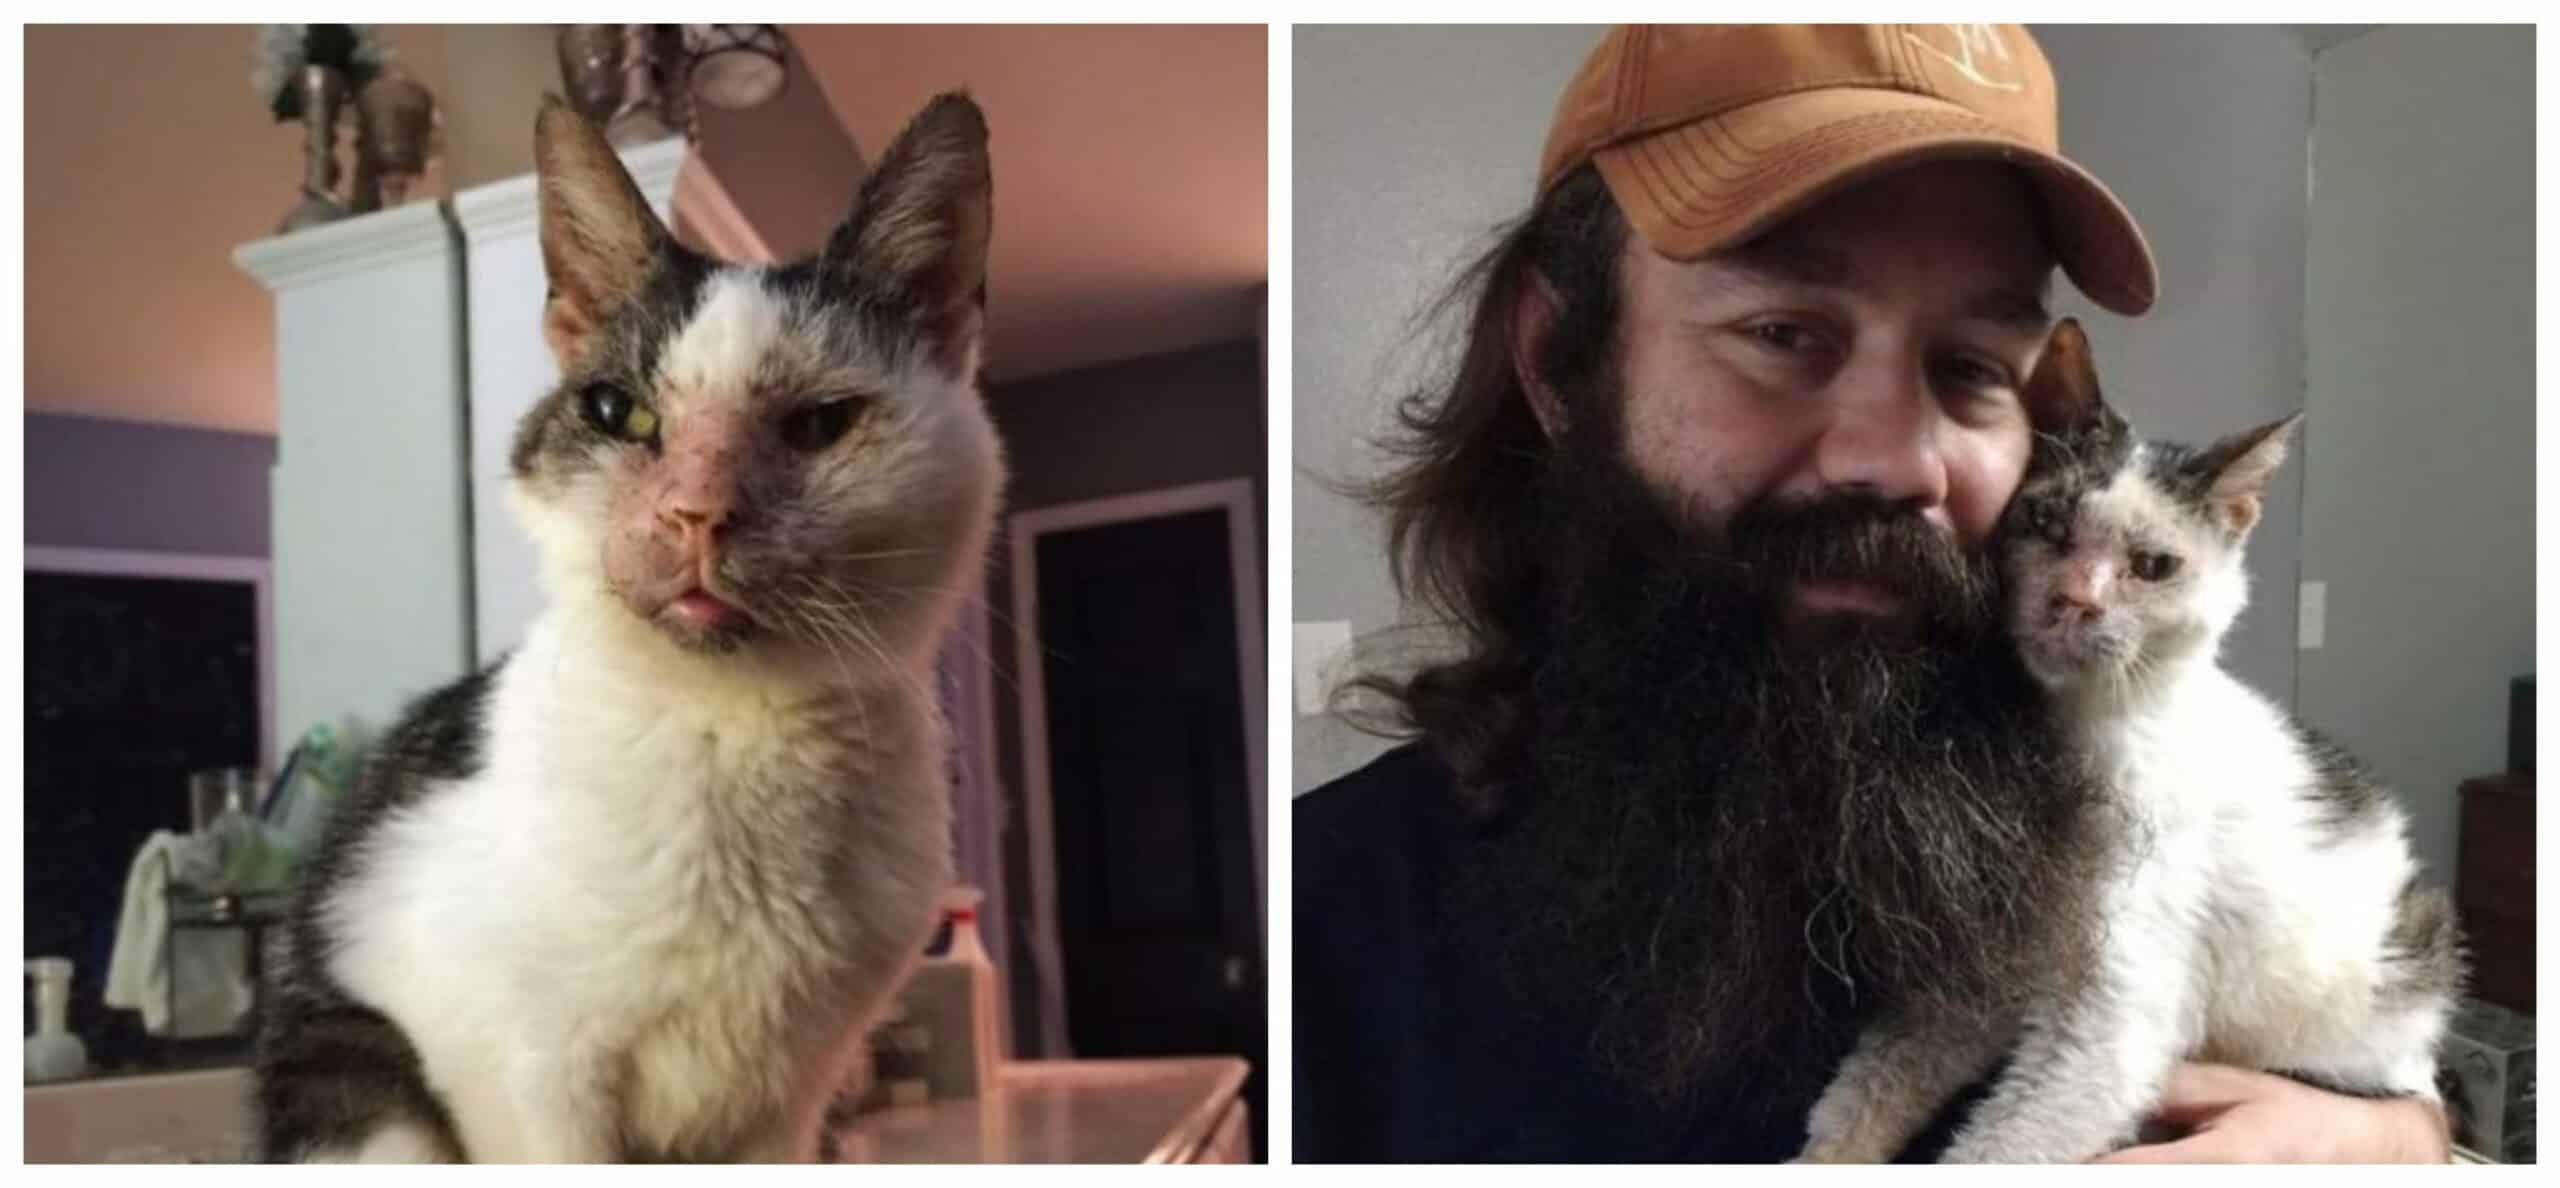 Thanks to all who helped this elderly, deaf, and completely helpless Cat